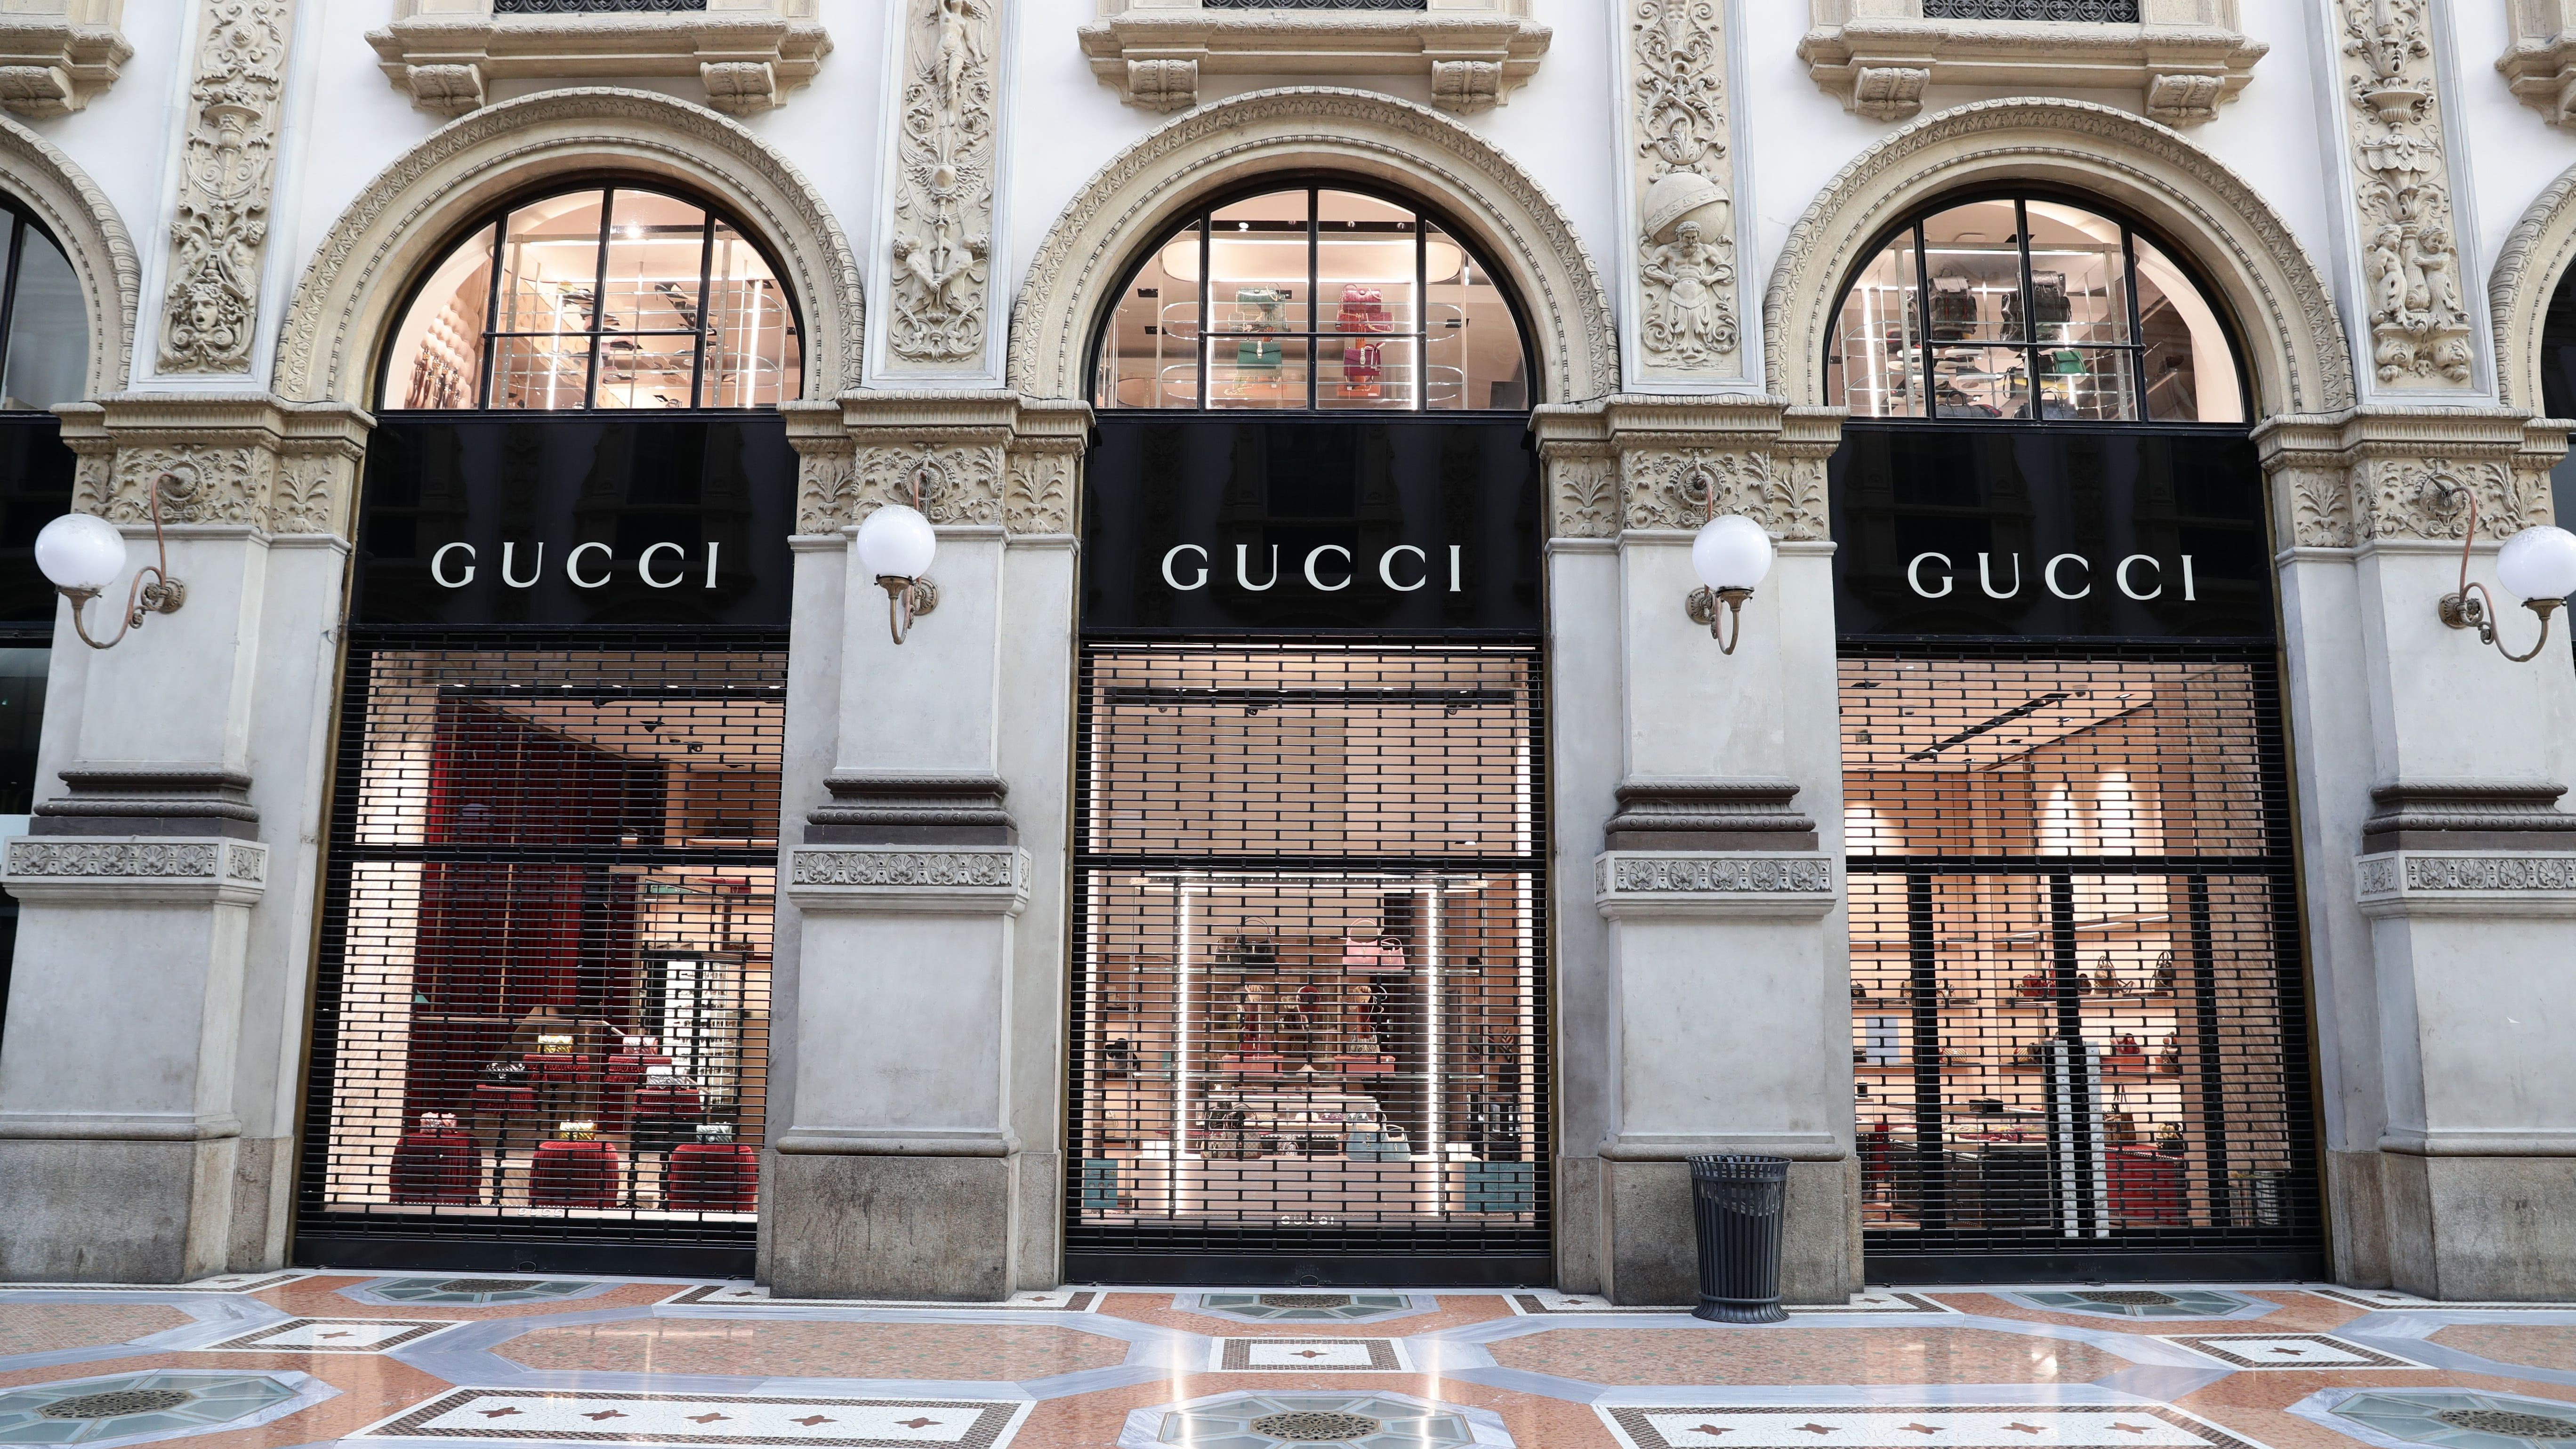 Kering: Too Expensive And Too Dependent On Gucci (OTCMKTS:PPRUY)